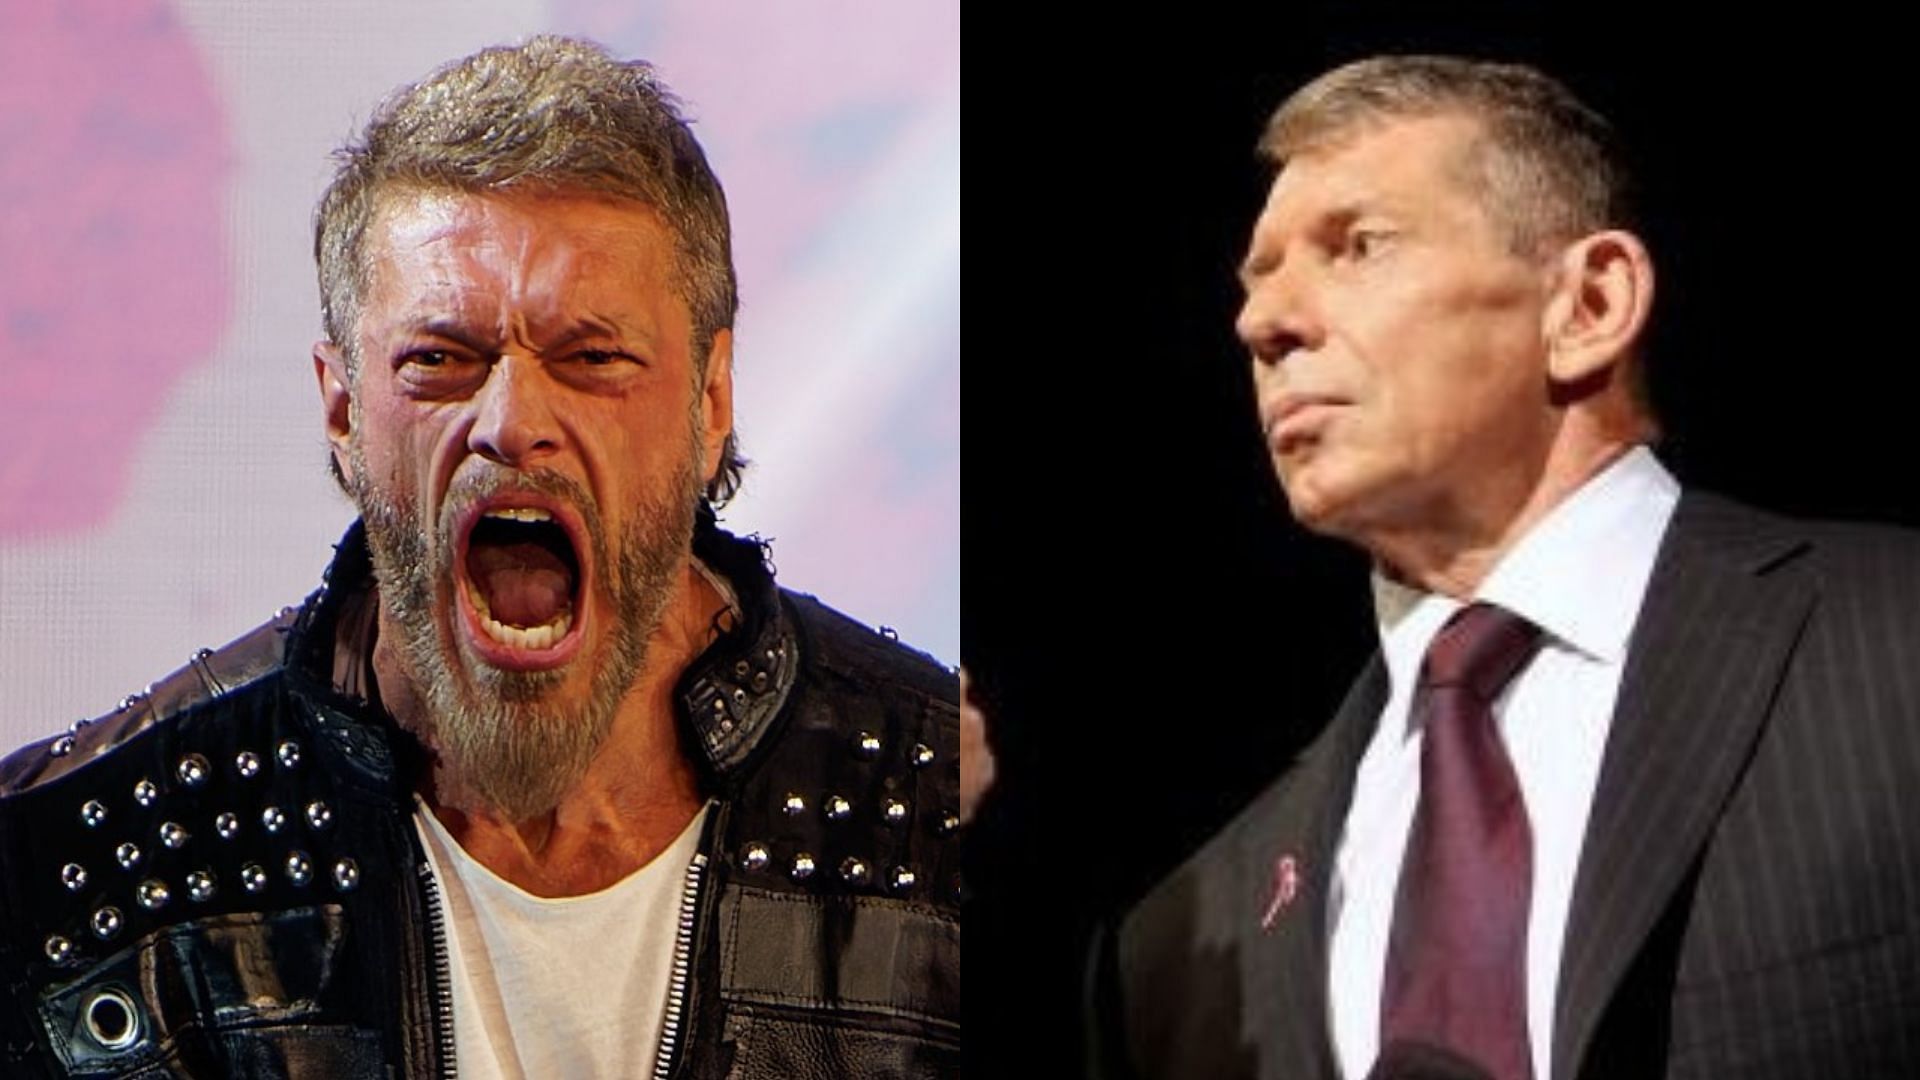 Would Edge have left WWE if Vince McMahon was in charge?